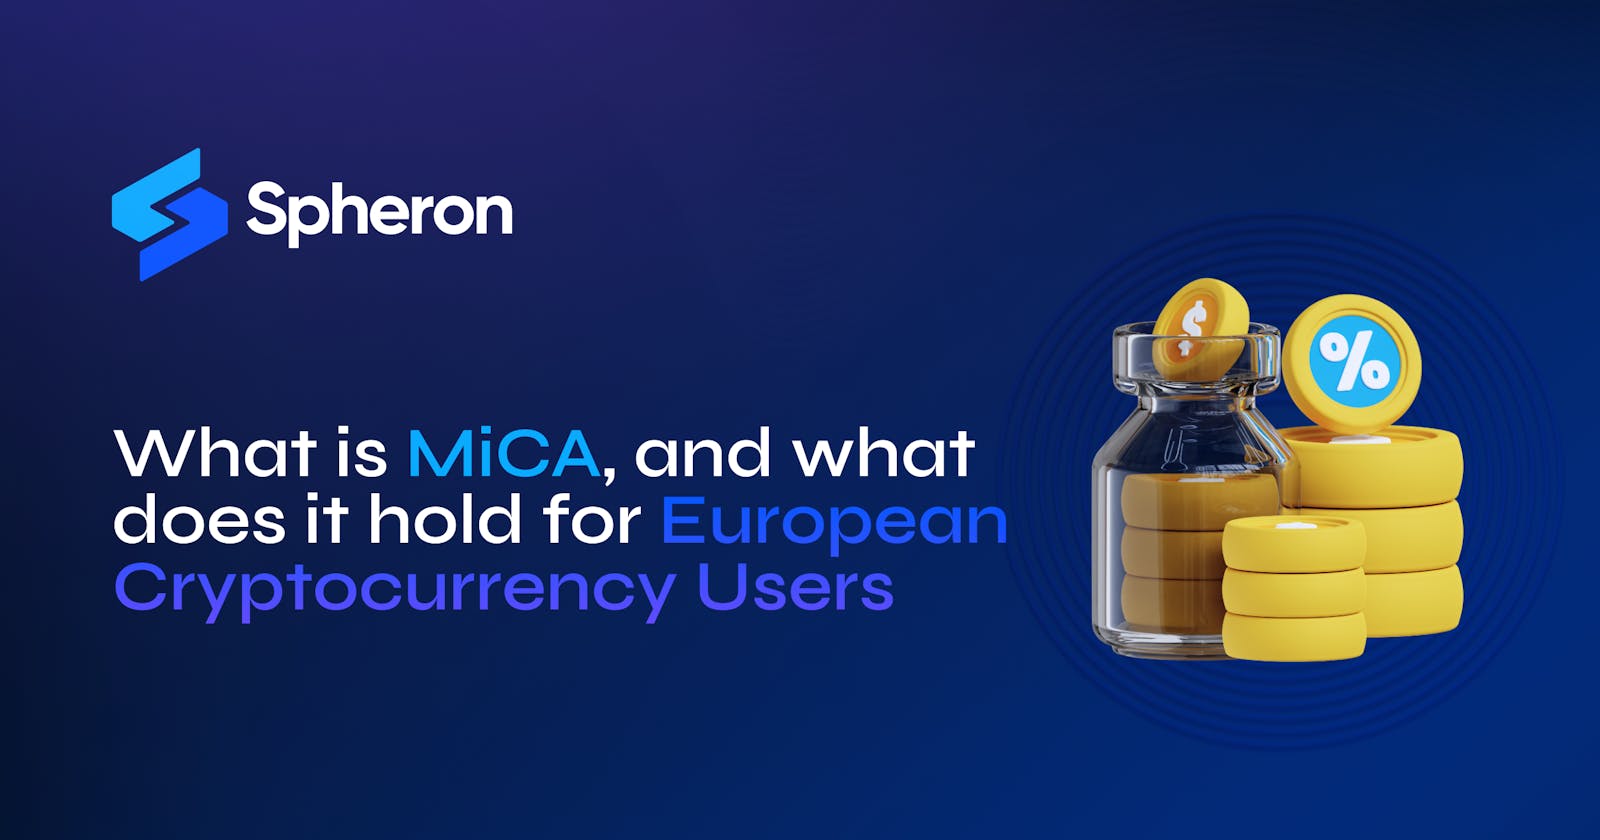 What is MiCA, and what does it hold for European cryptocurrency users